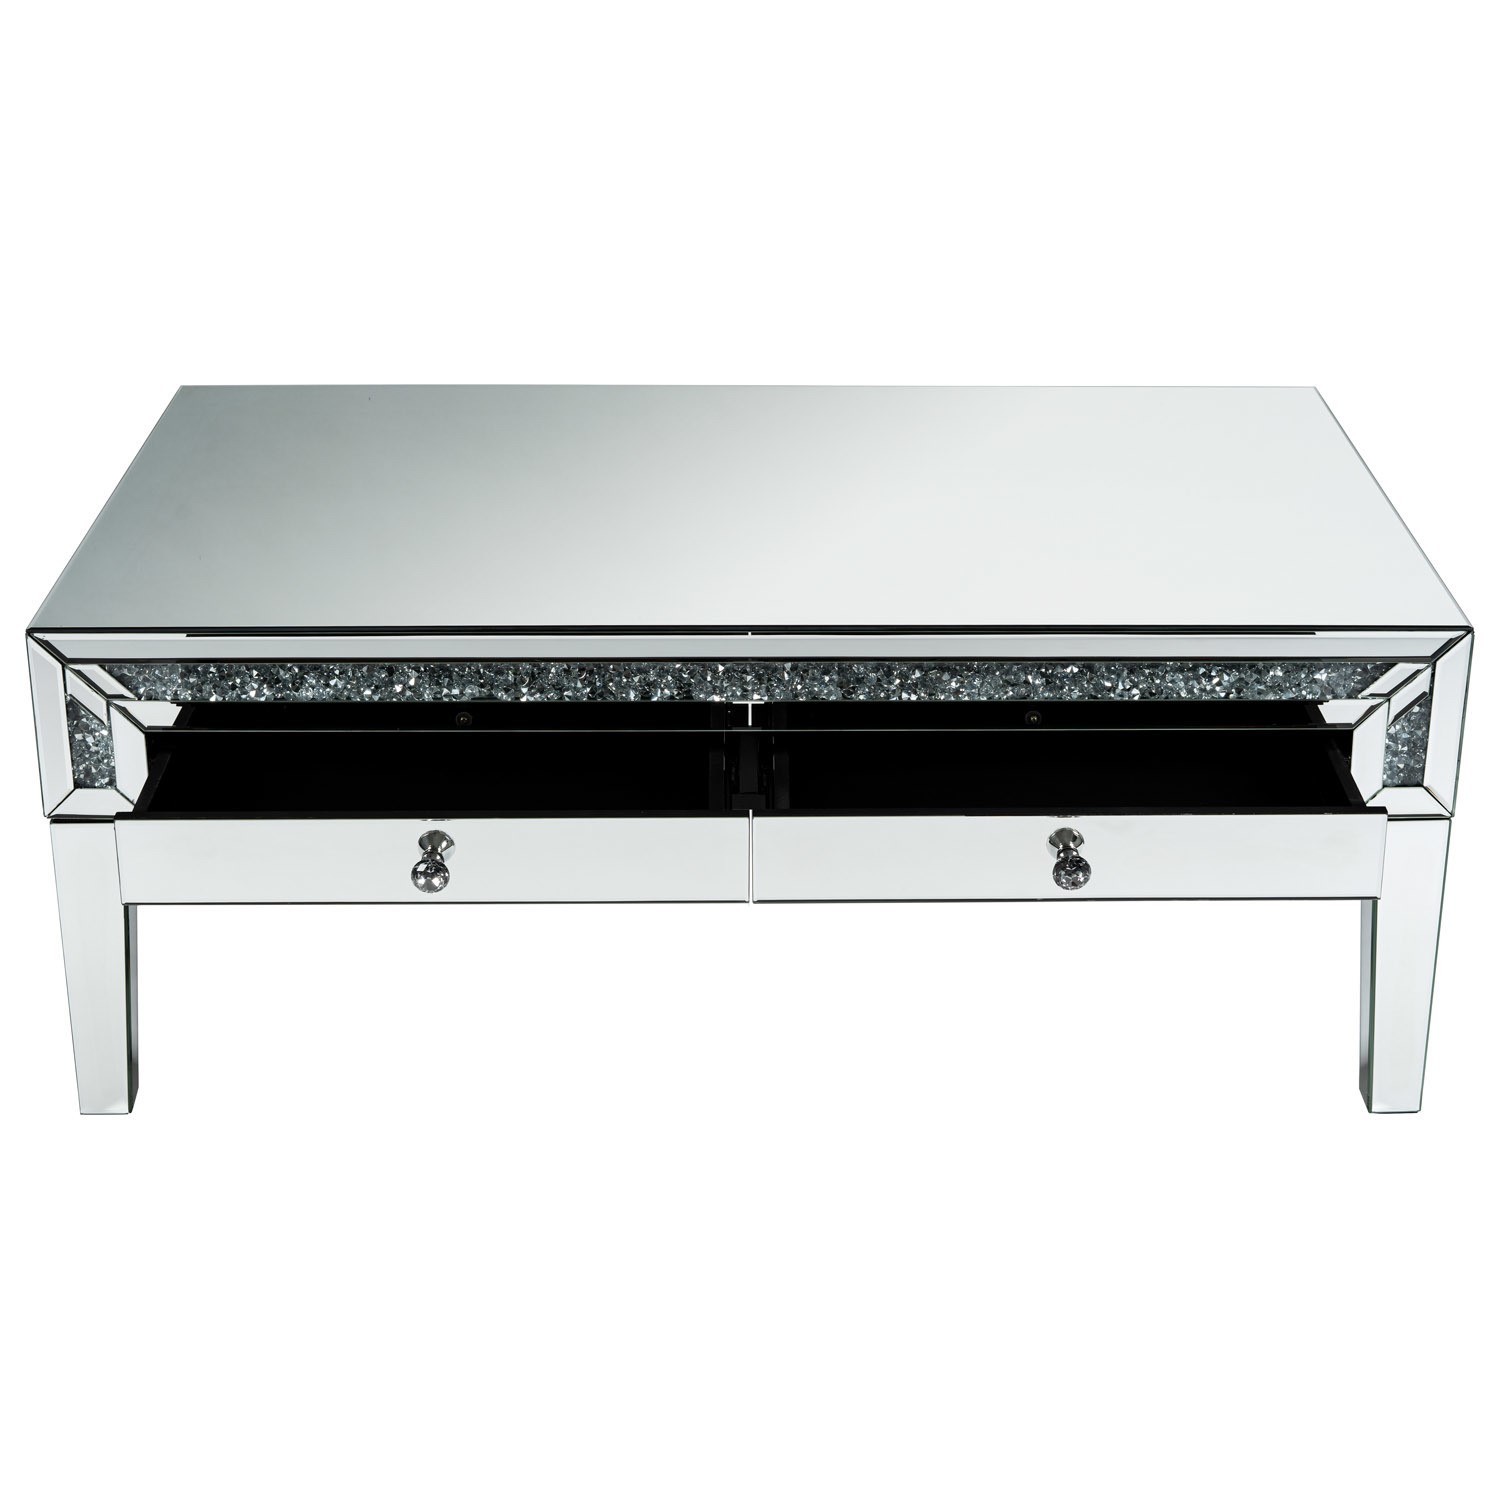 Mirrored Coffee Table With Drawers, Oversized Mirrored Coffee Table